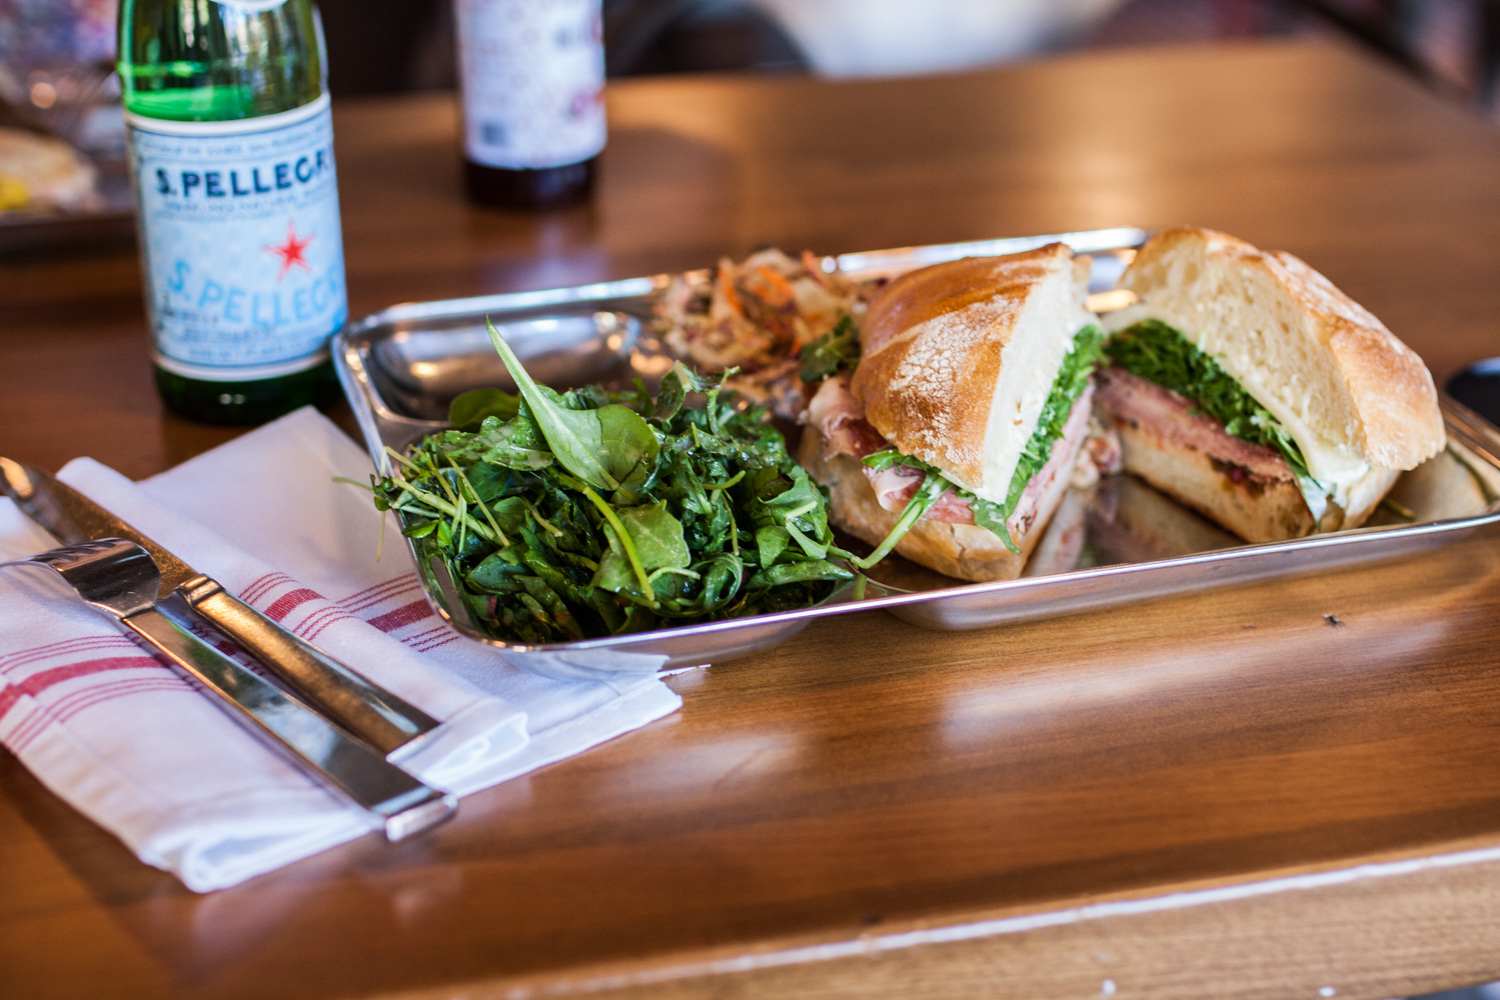 Sandwich and salad at Reno Provisions. Image by Alexander Howard / Lonely Planet